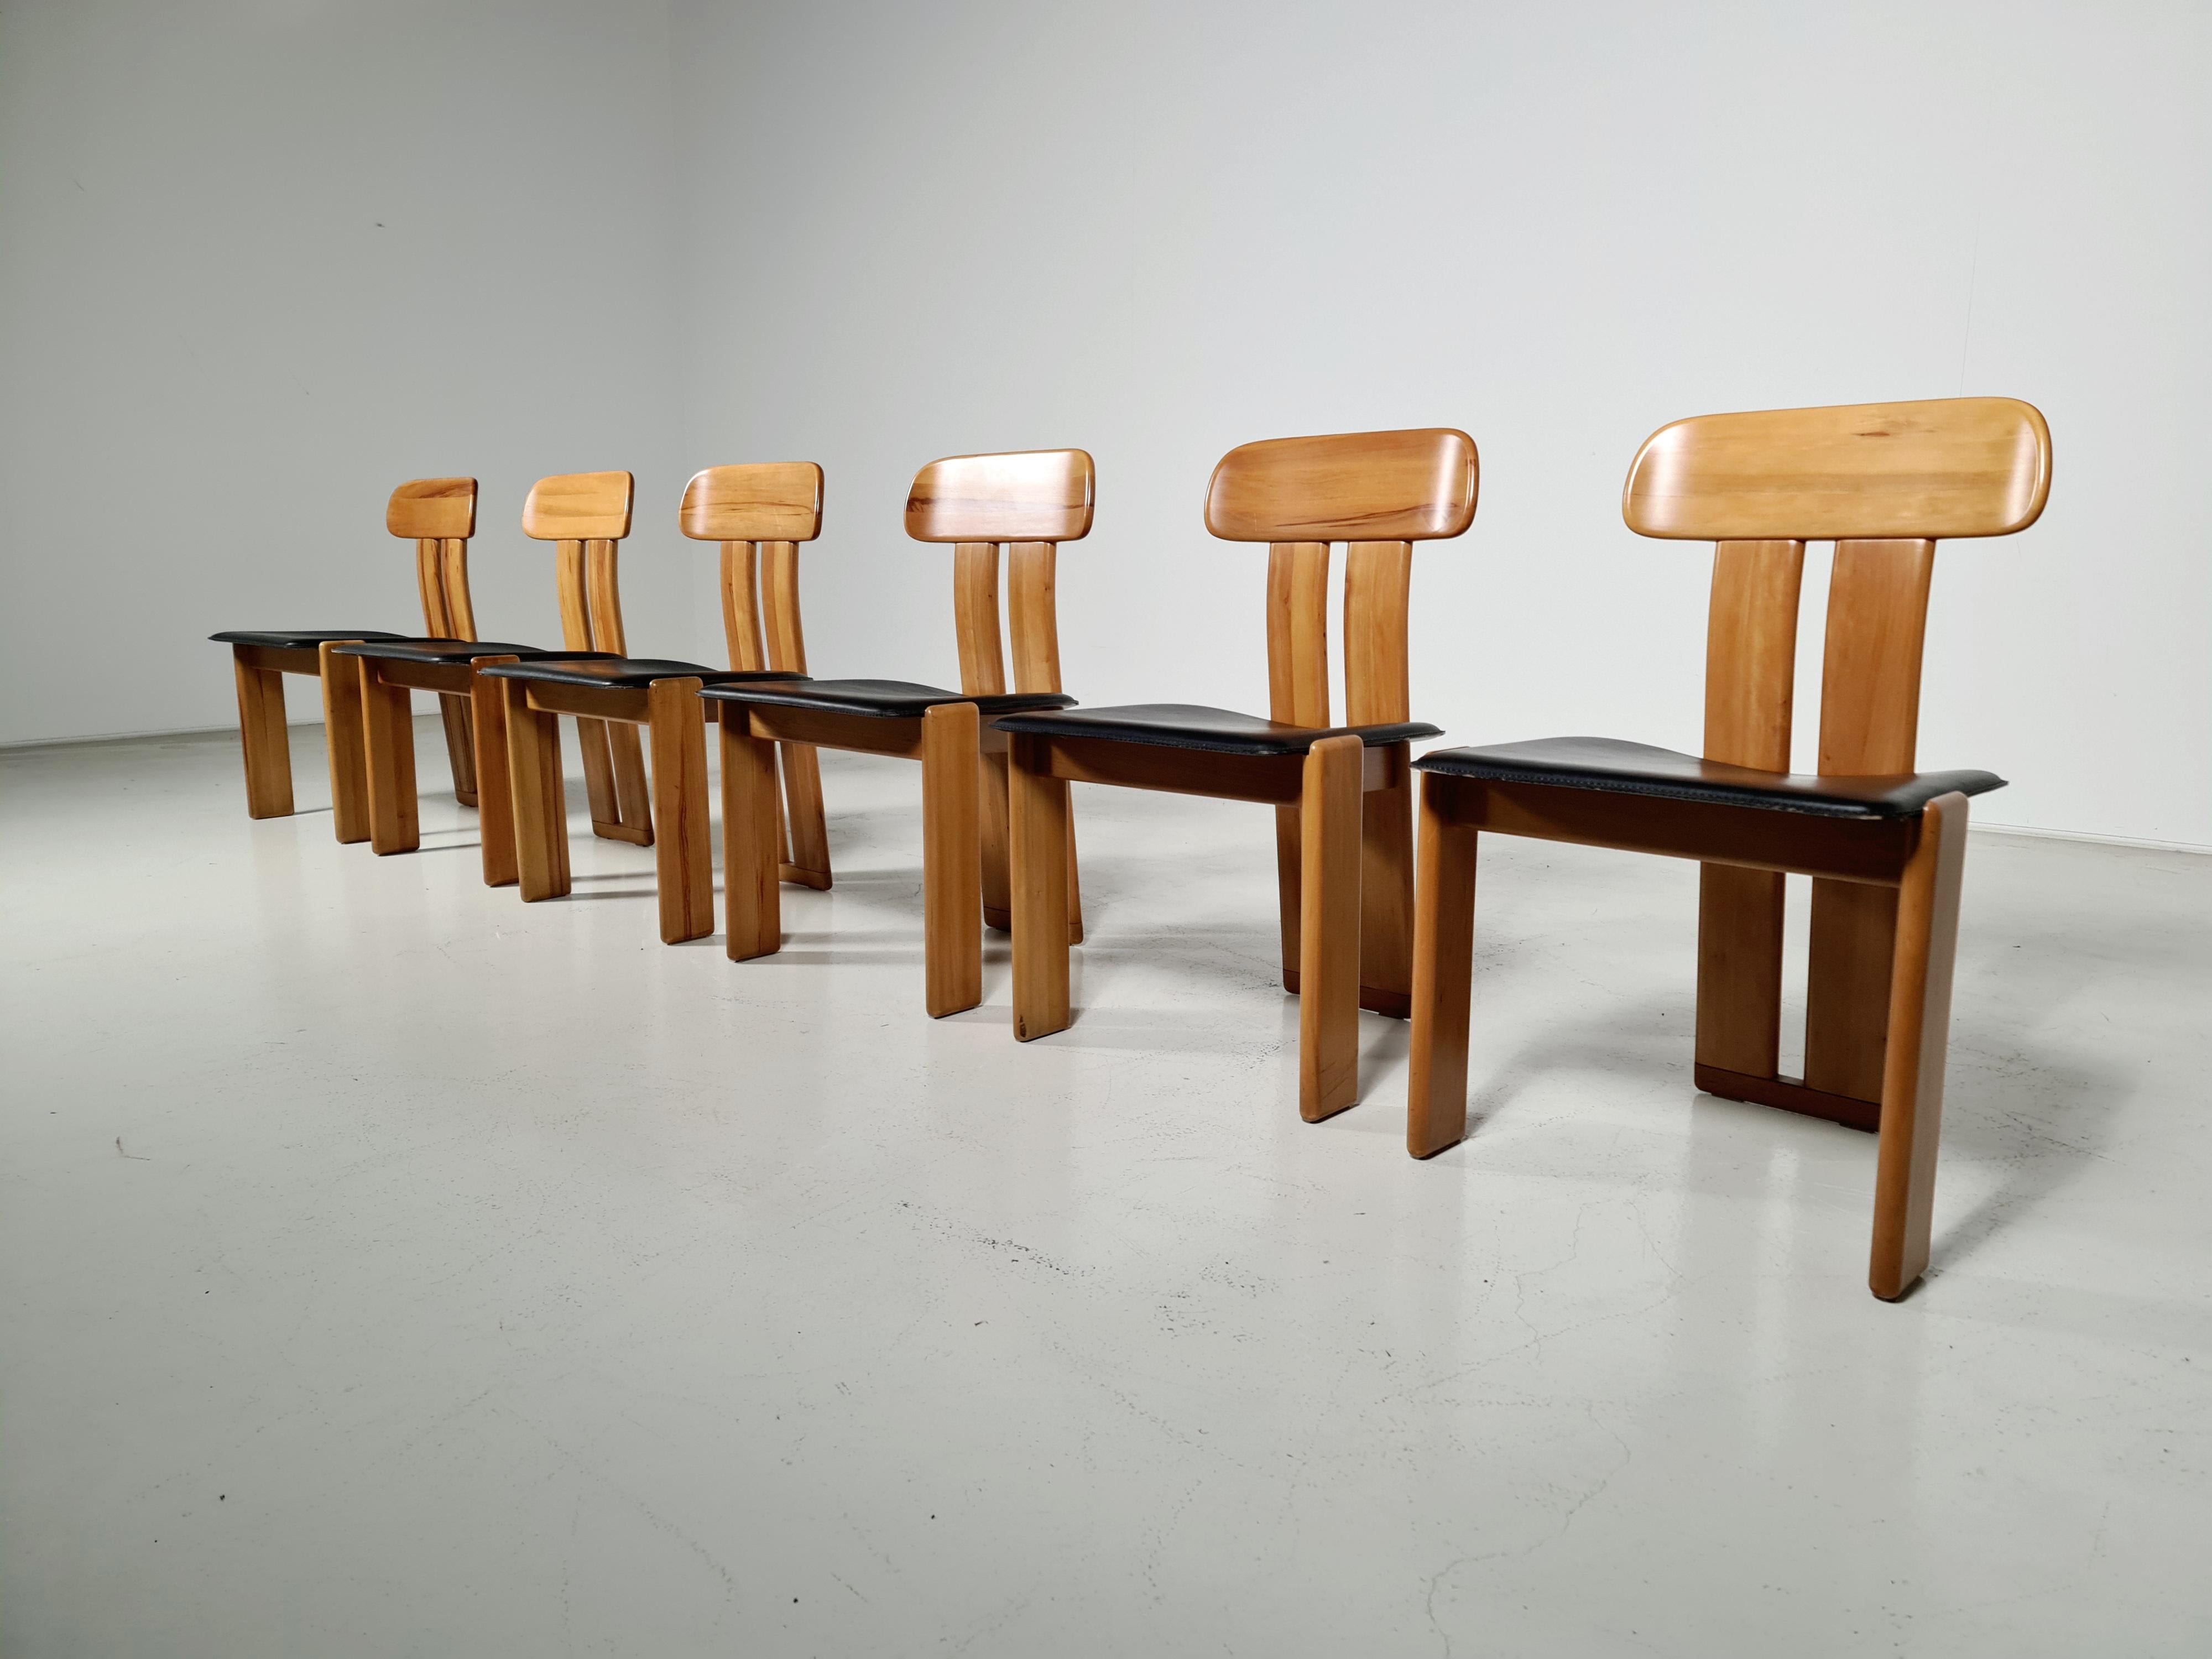 Set of 6 sculptural Italian dining chairs with saddle-stitched leather seats, black colored. Very comfortable even for larger sitters despite the slim profile. The color of the Italian walnut frame is warm which accompanies the patinated black